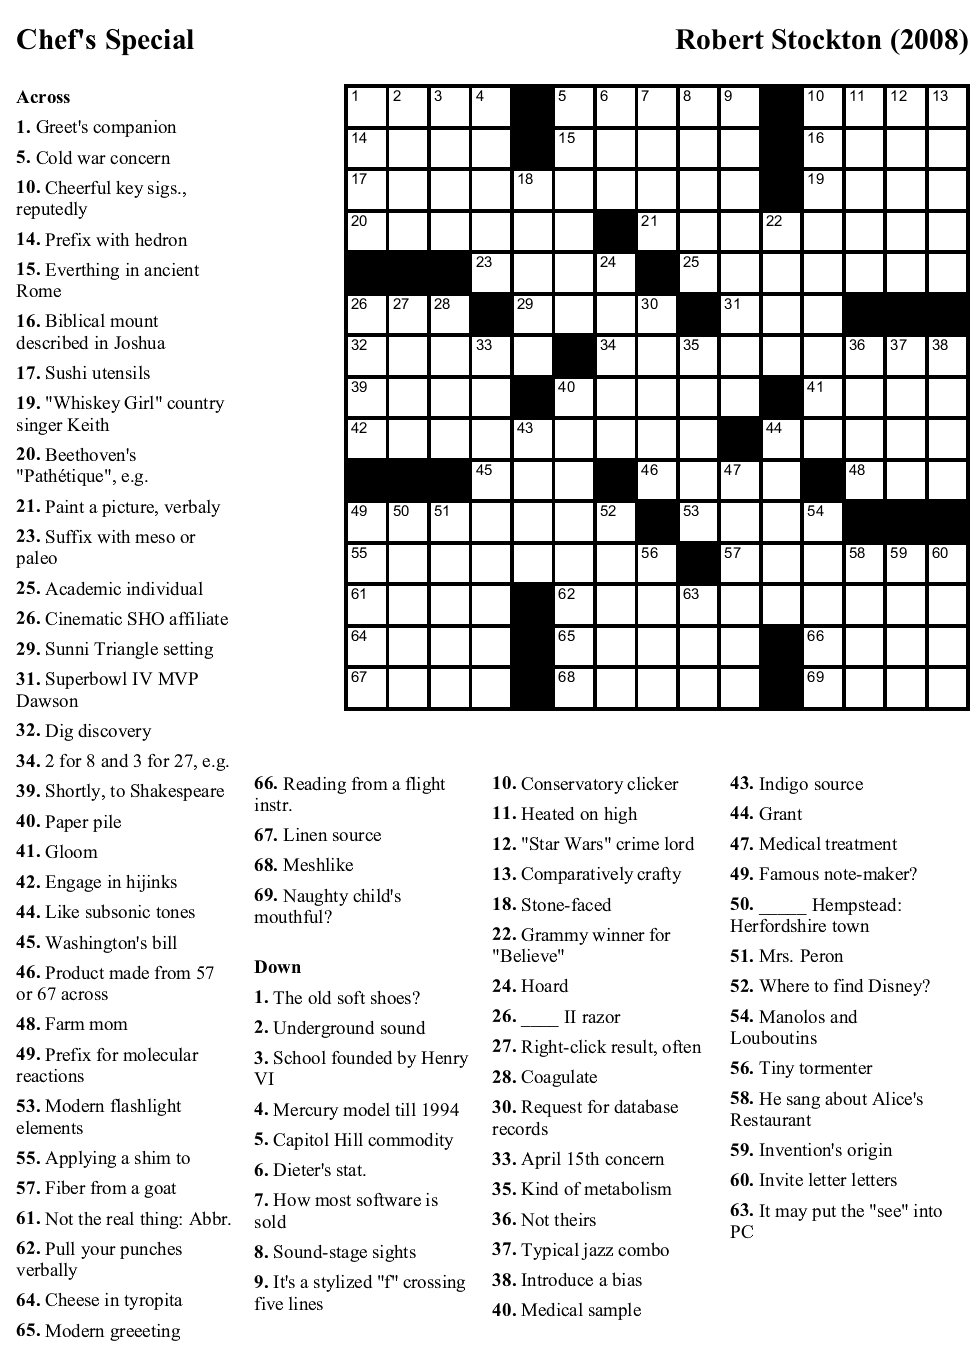 Free Printable Ny Times Crossword Puzzles | Free Printables - Free Printable New York Times Crossword Puzzles